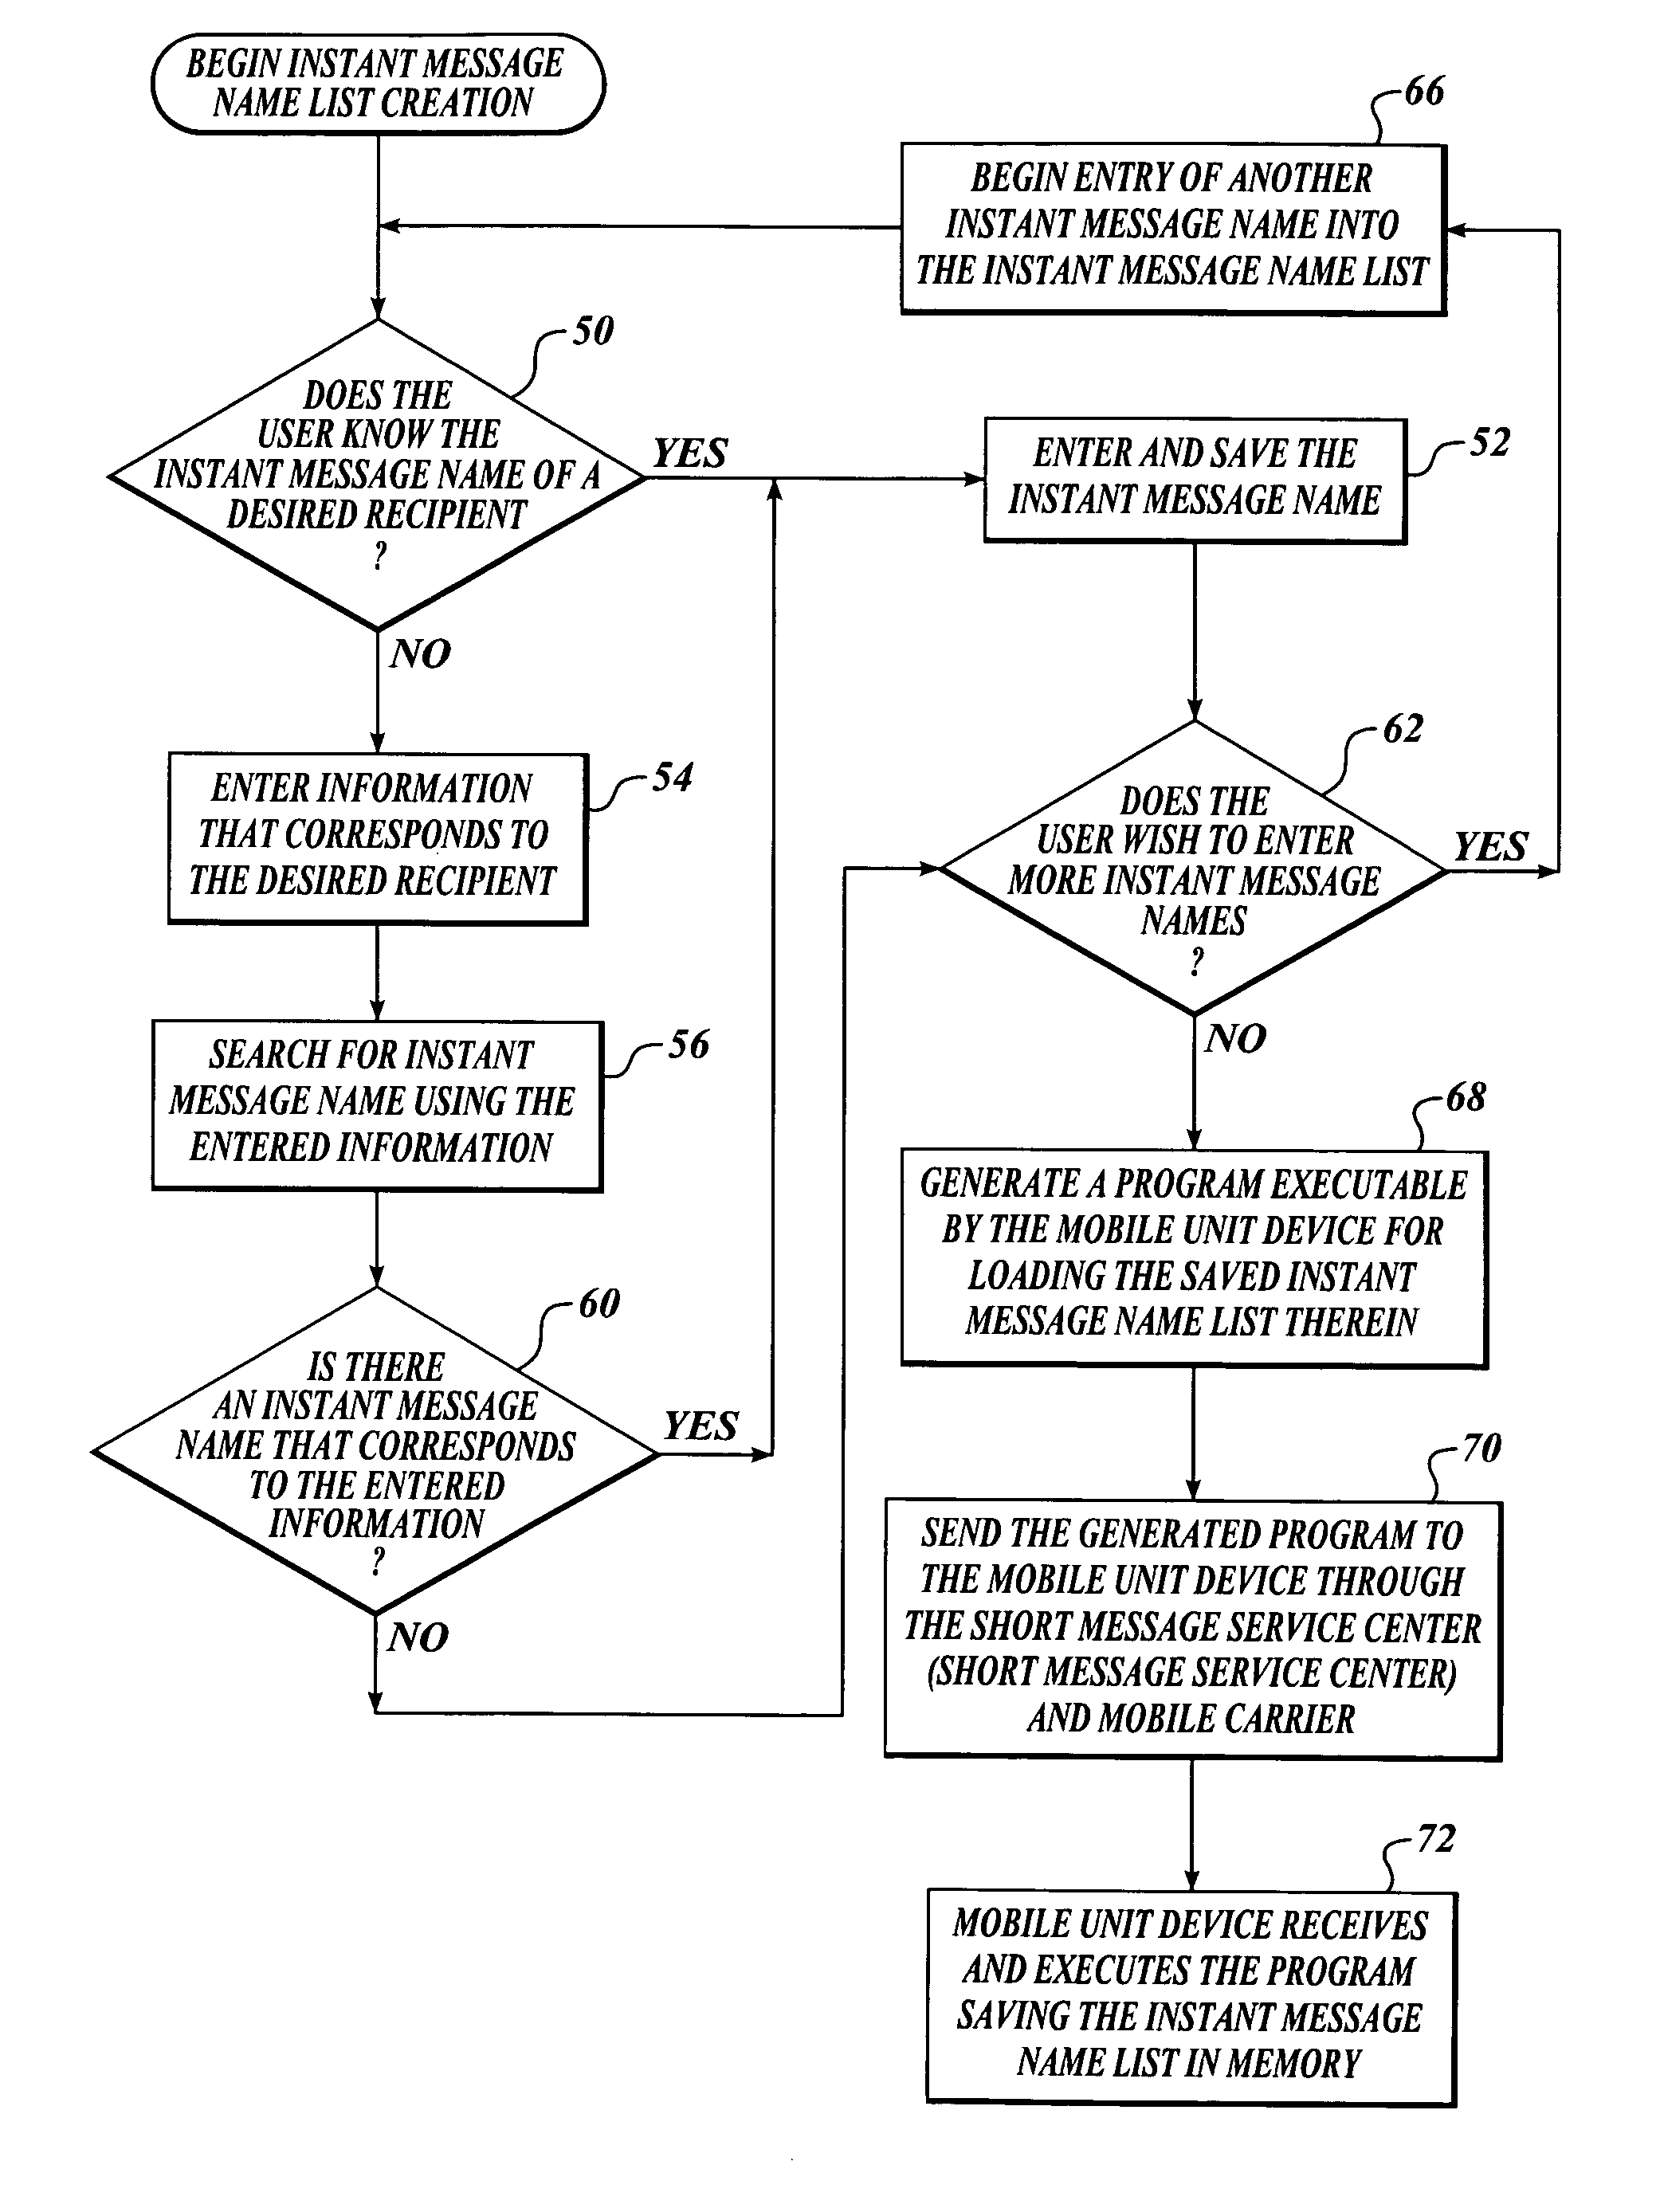 Method and system for messaging across cellular networks and a public data network